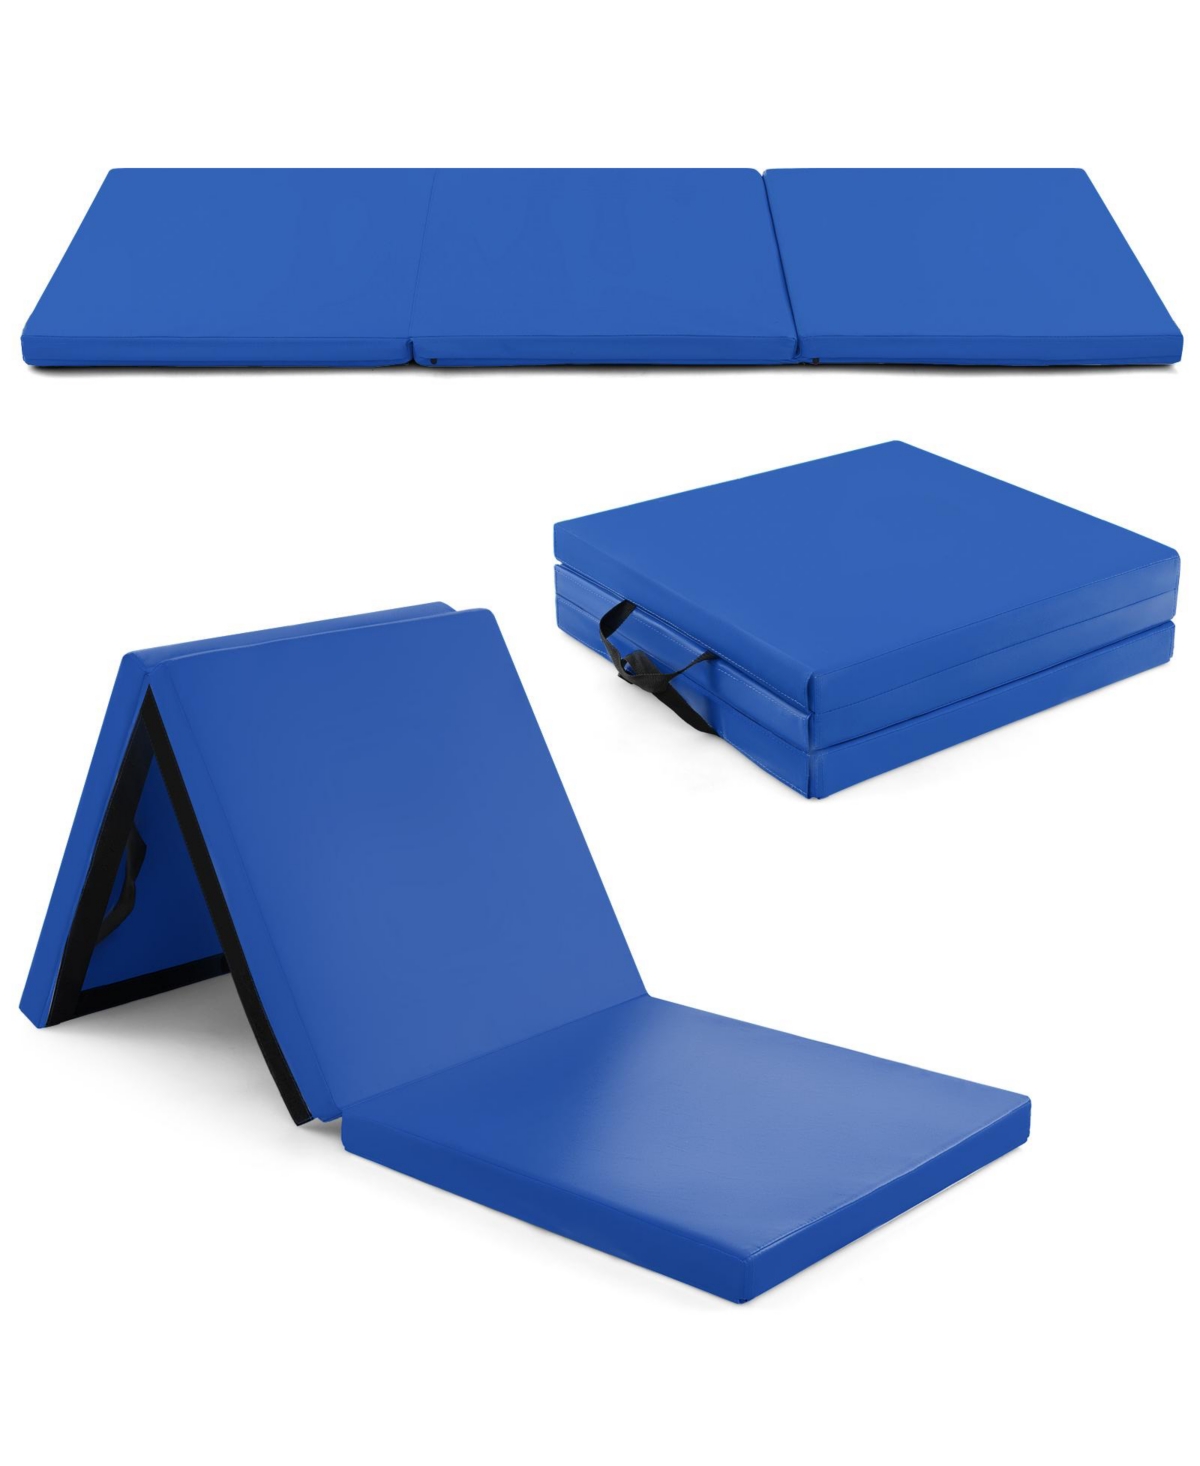 6 x 2 Ft Tri-Fold Gym Mat with Handles and Removable Zippered Cover - Multi-color